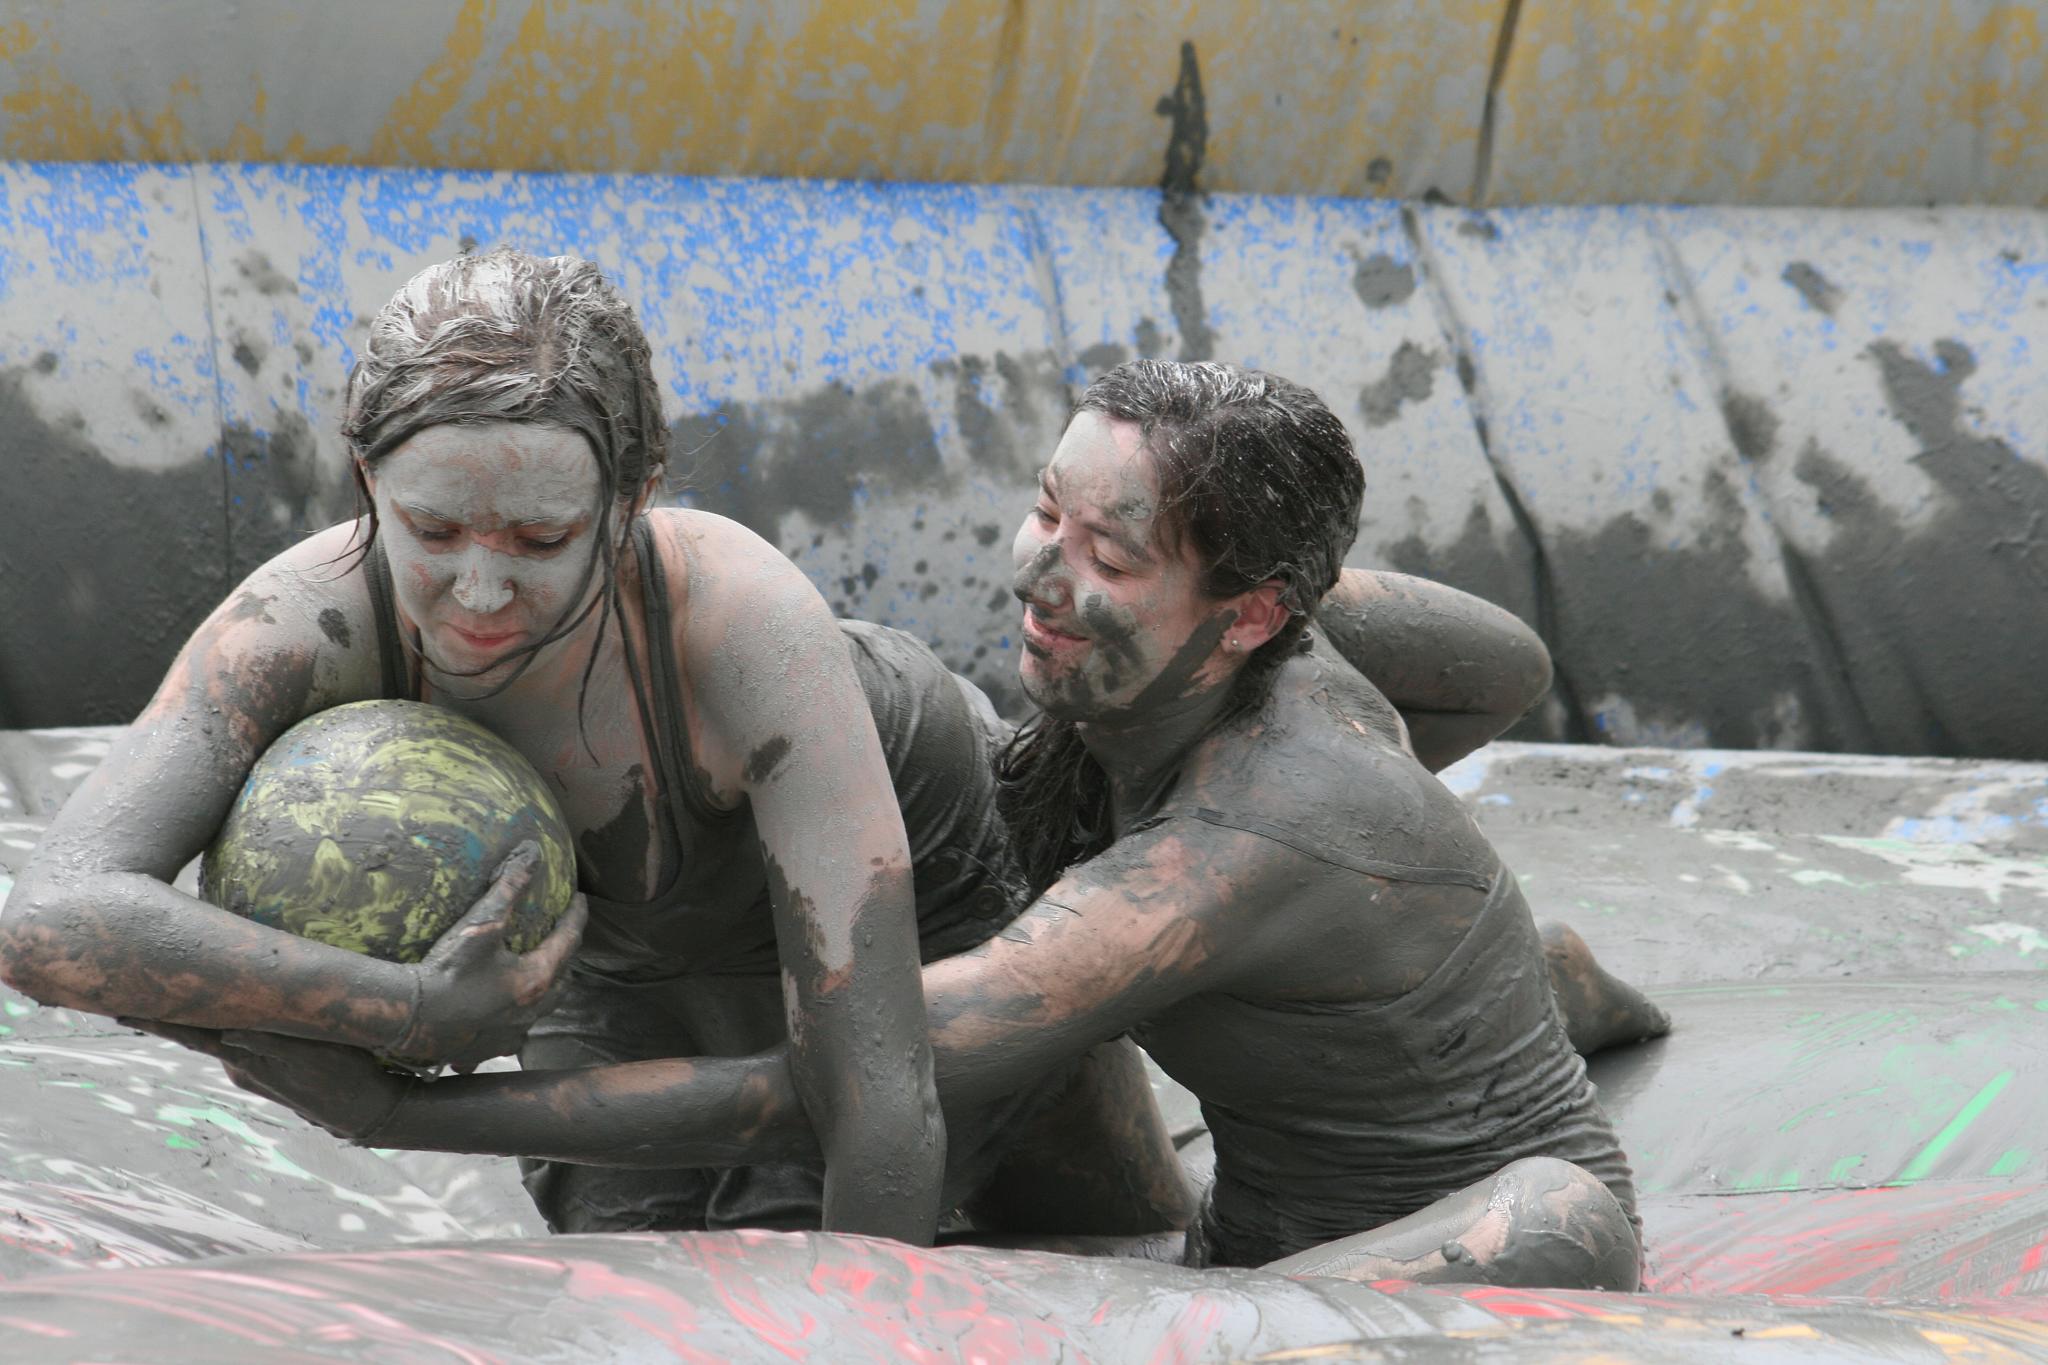 some people and a ball in the mud